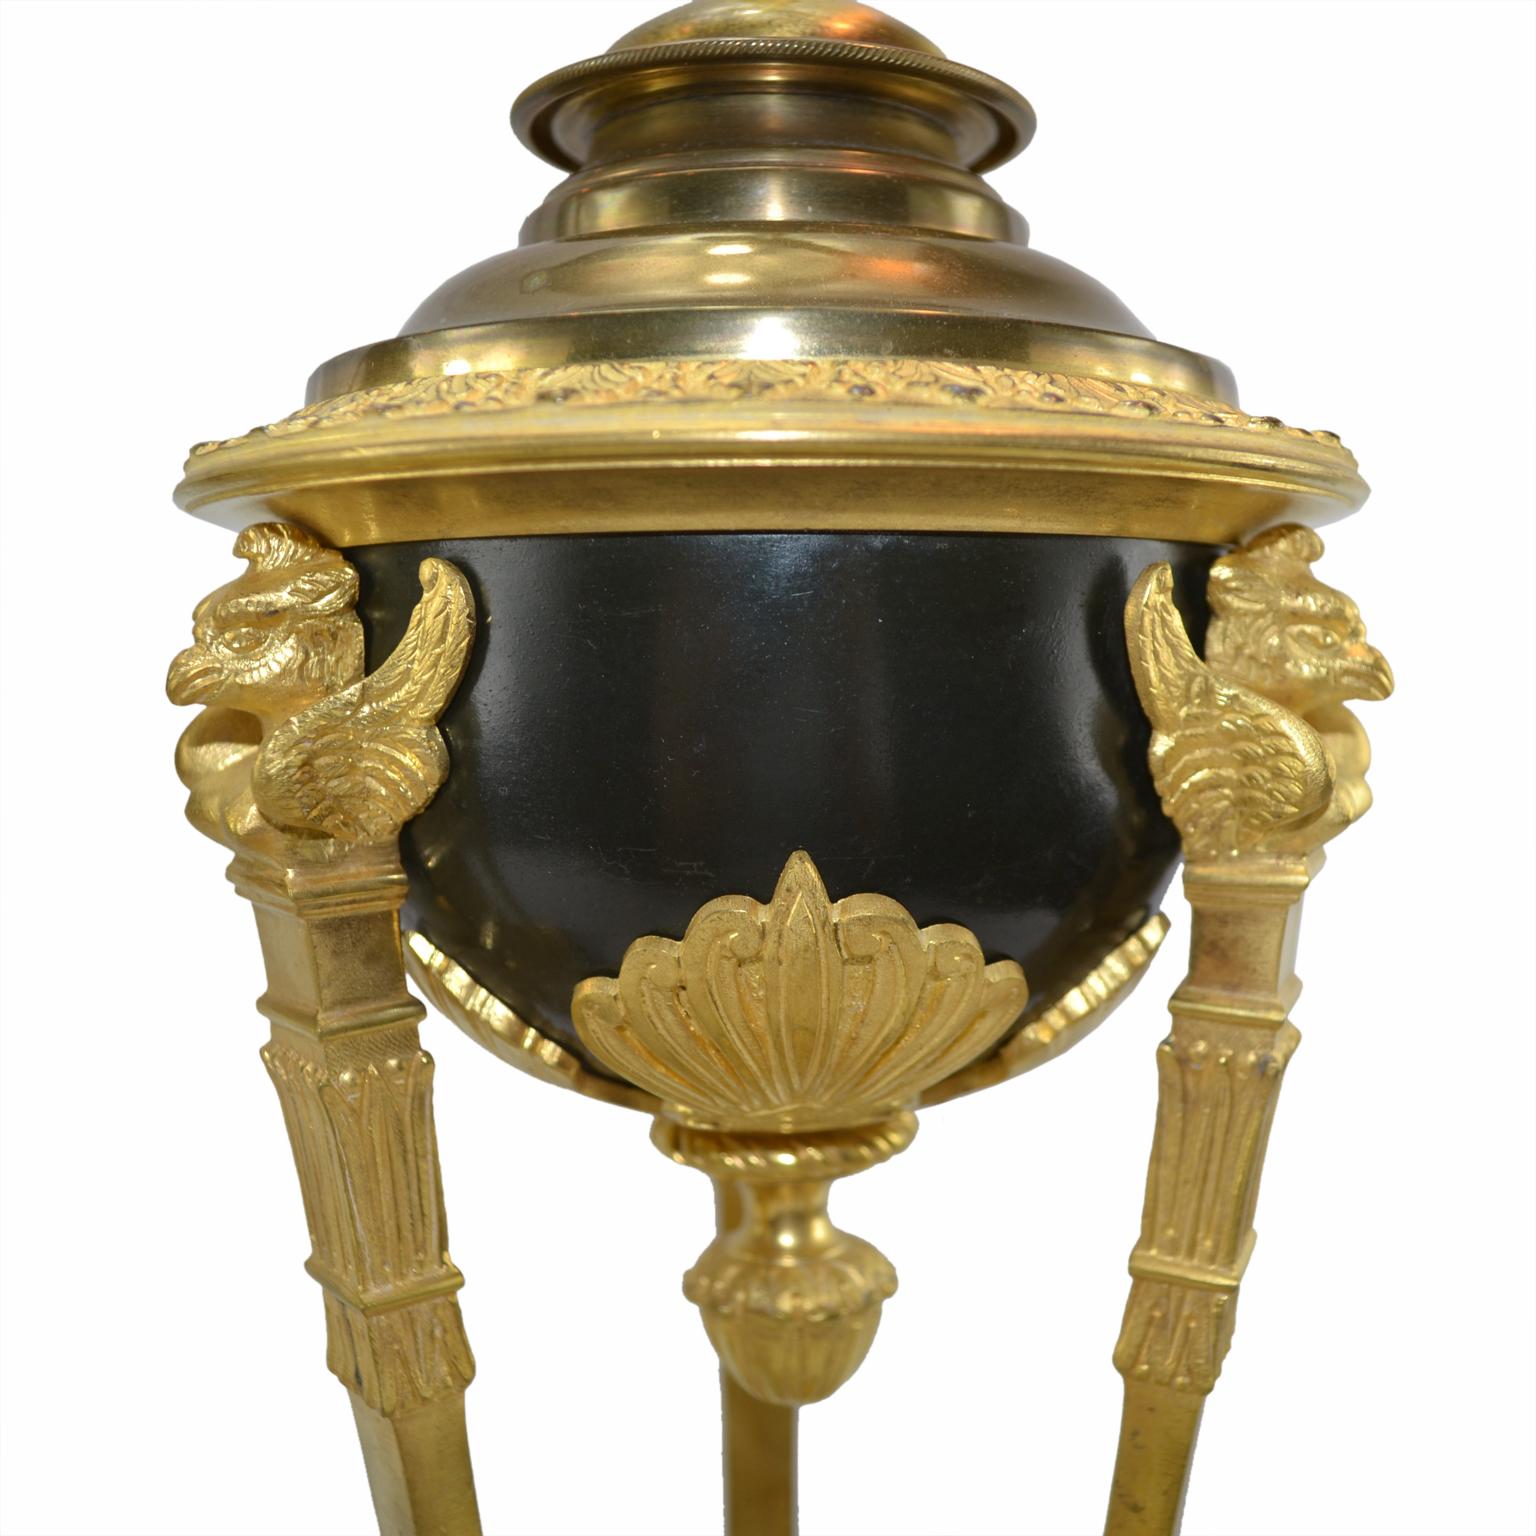 Pair of 19th Century Gilt and Patinated Bronze Pompeian Empire Style Lamps (19. Jahrhundert)